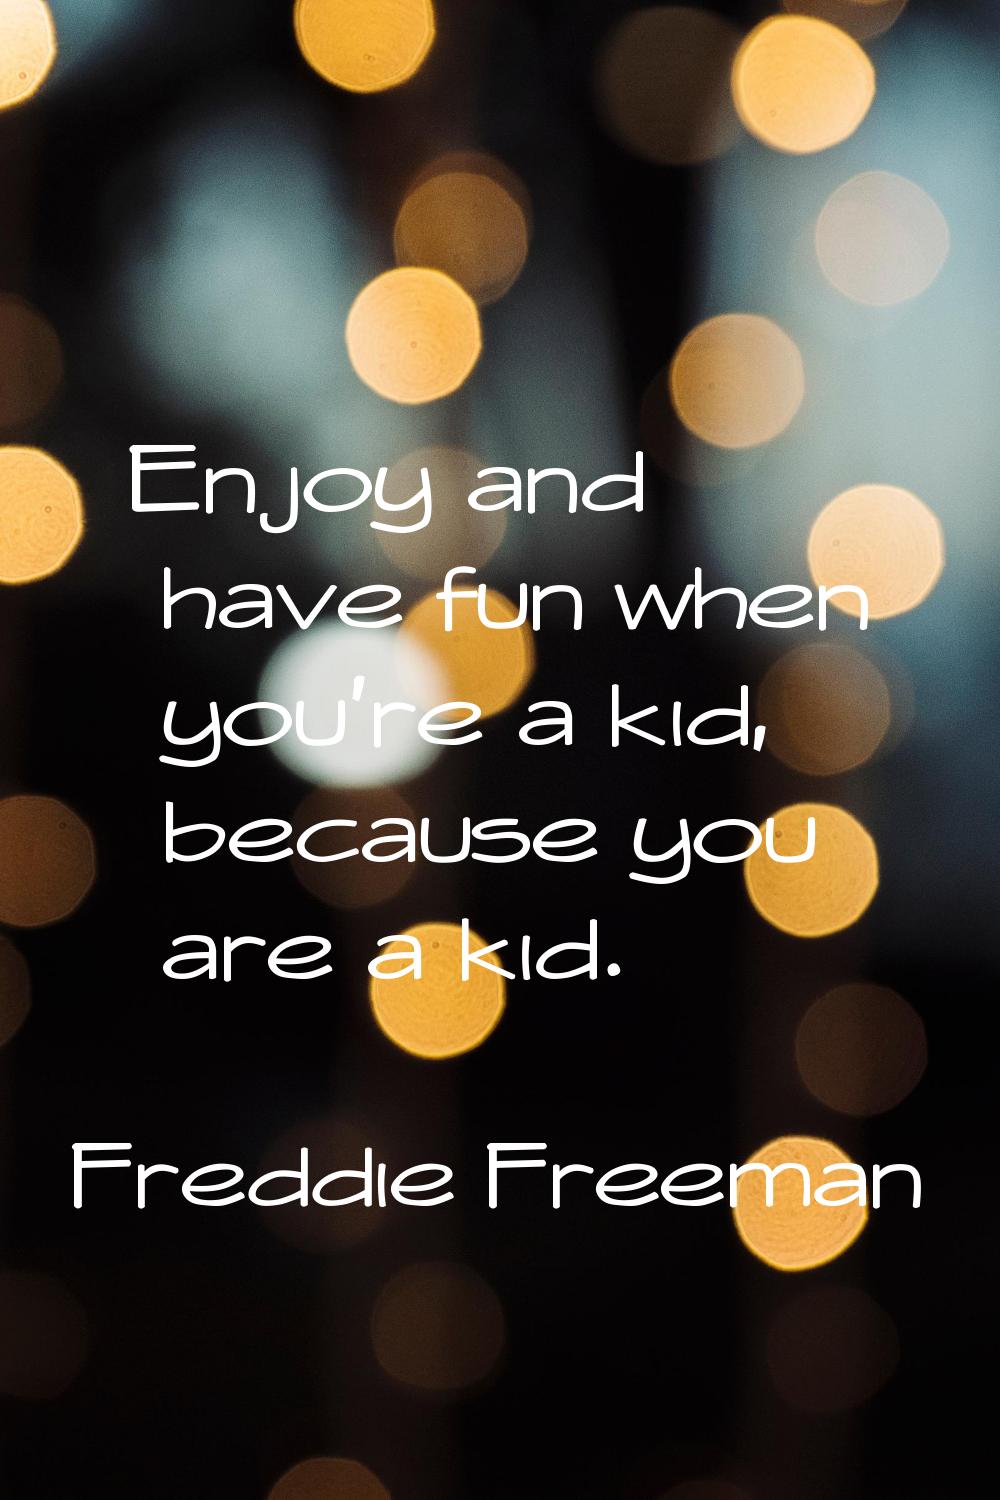 Enjoy and have fun when you're a kid, because you are a kid.